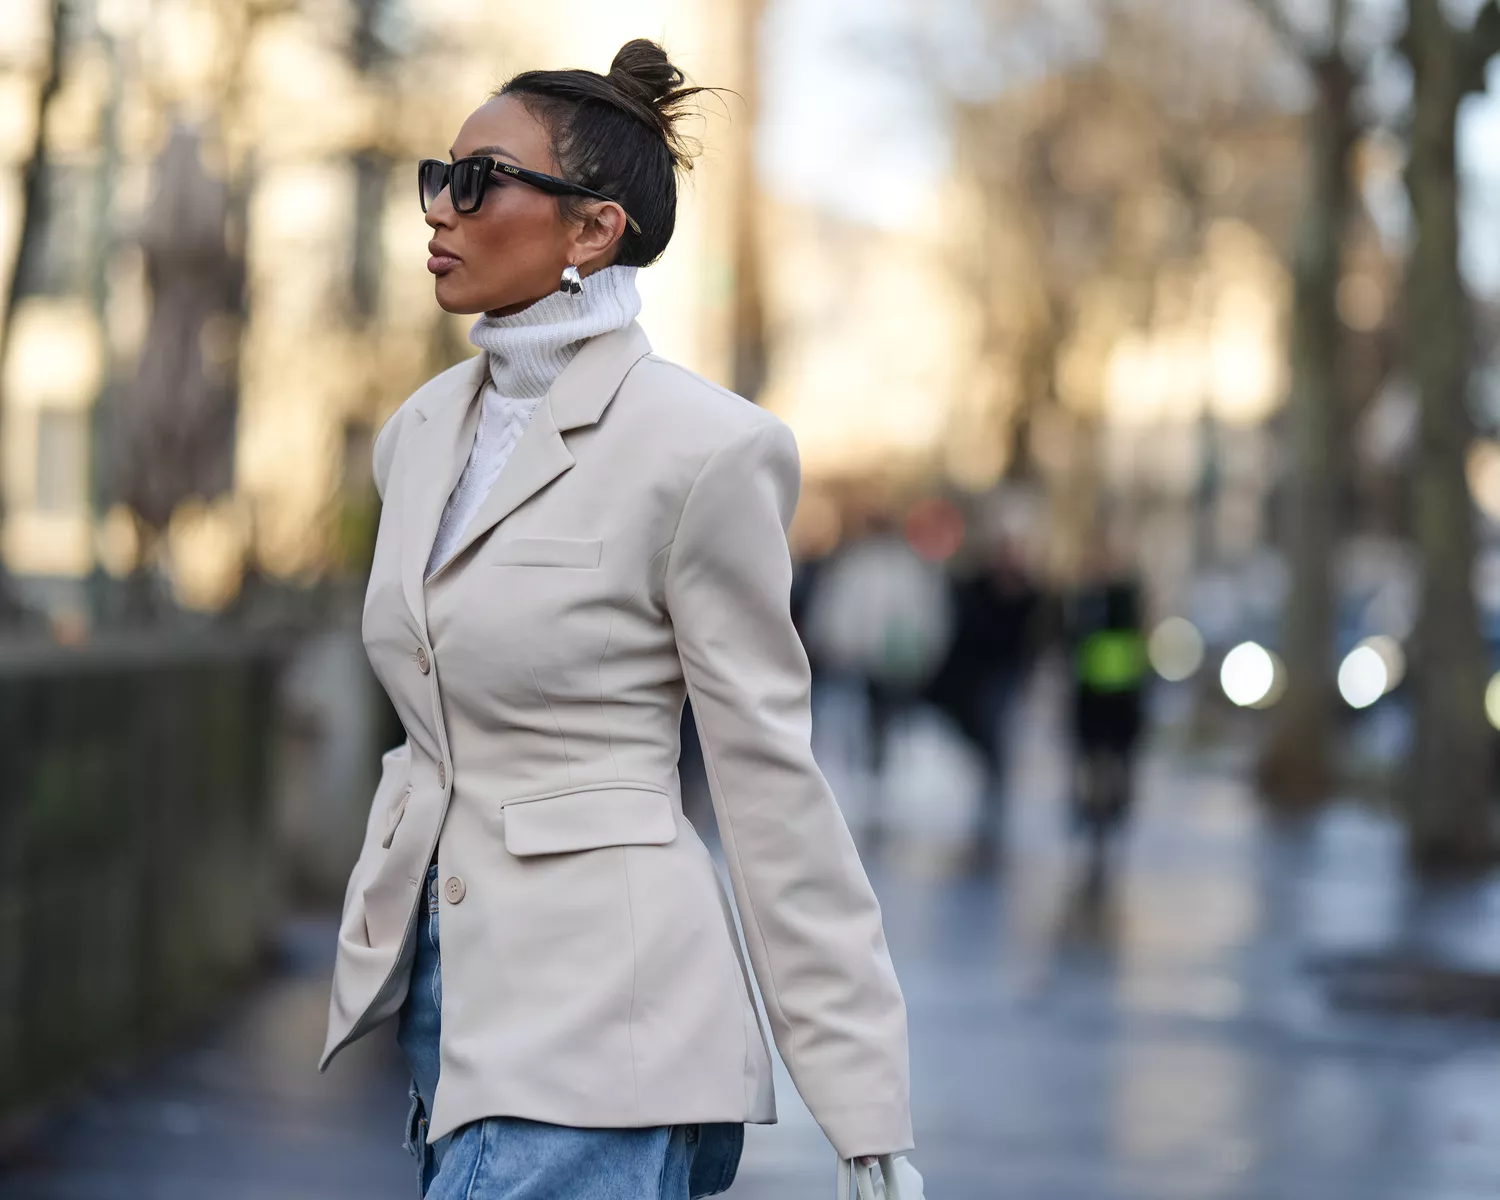 6 Easy Outfits to Wear to Work When It’s Freezing Outside